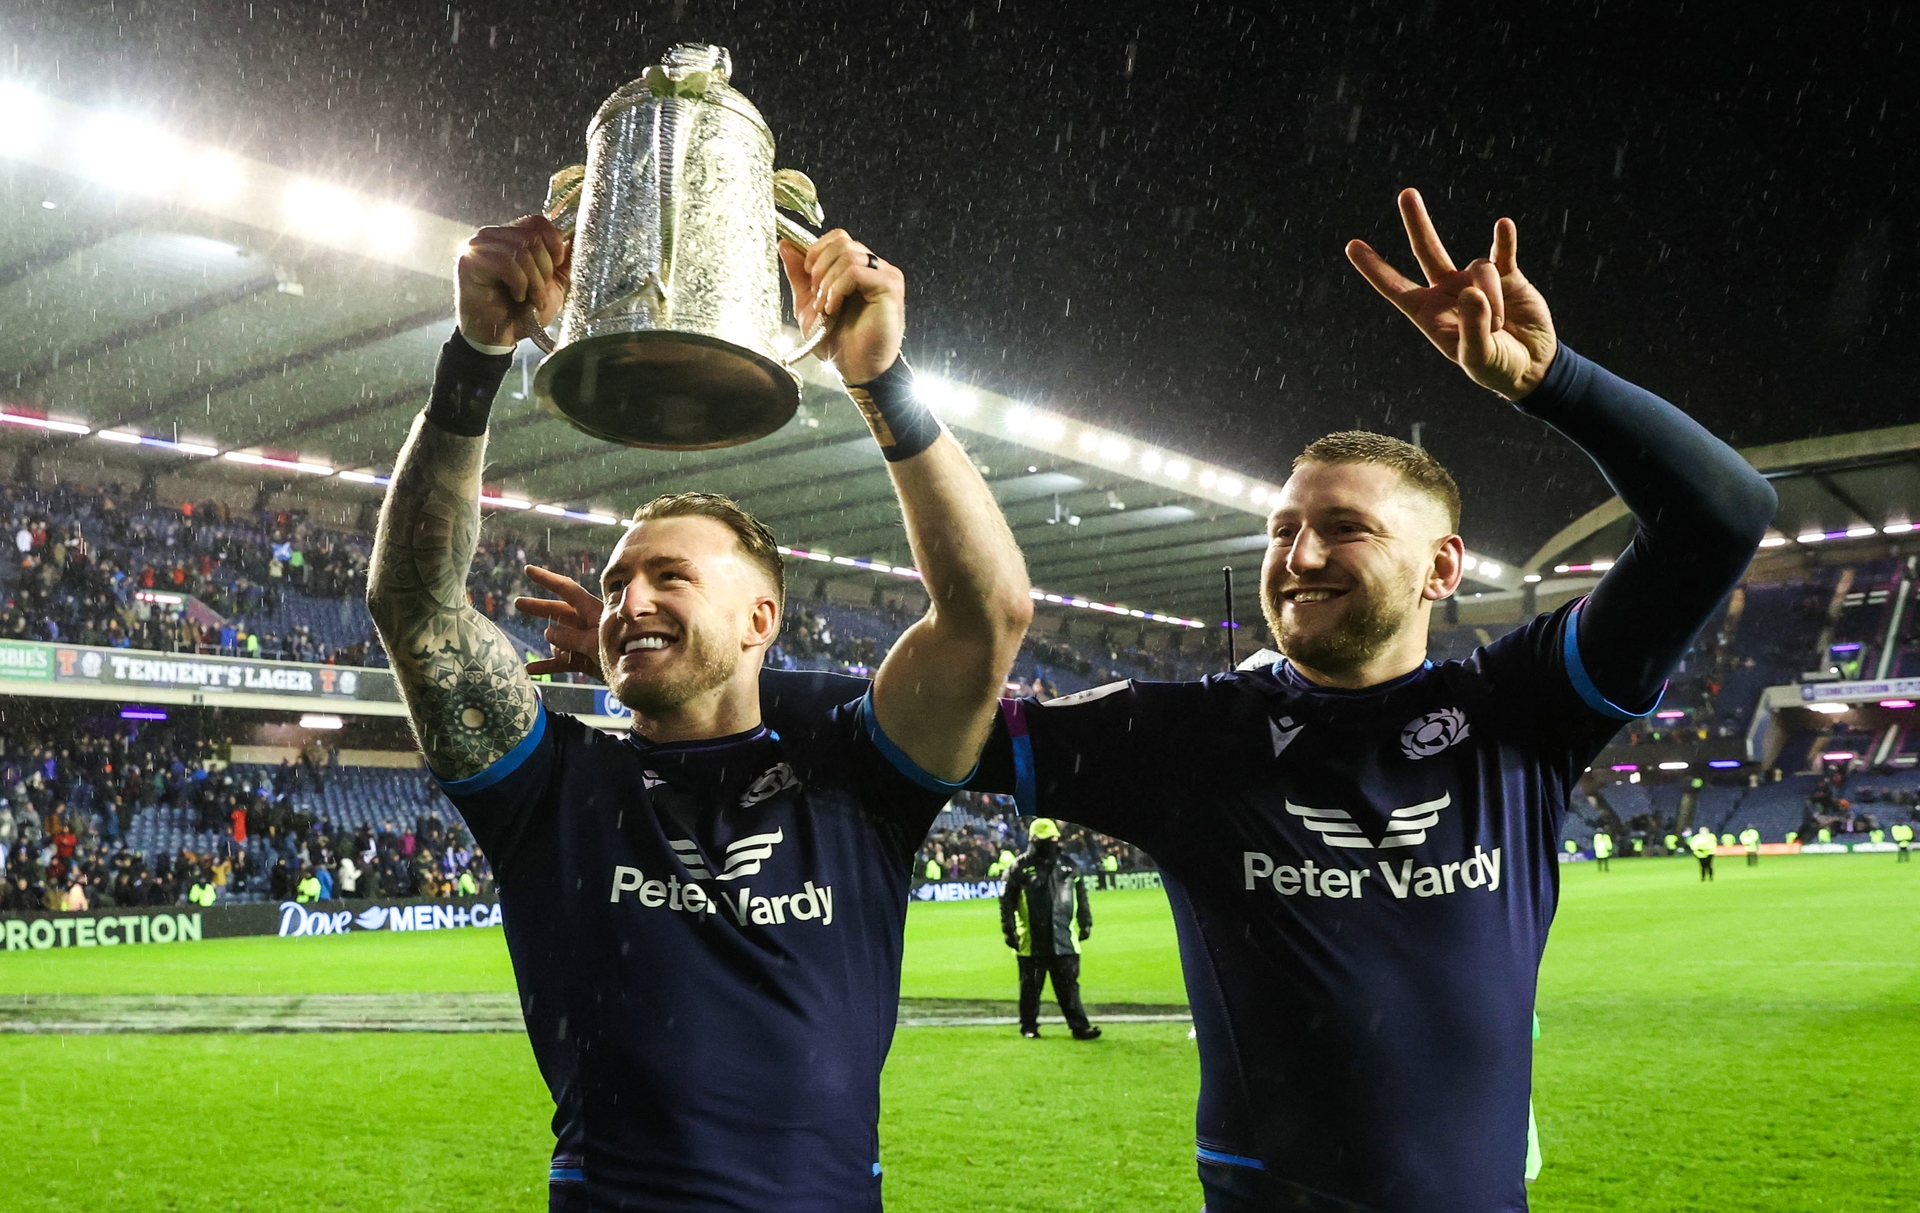 Stuart Hogg and Finn Russell with the Calcutta Cup after Scotland beat England in the Six Nations opener at Murrayfield.